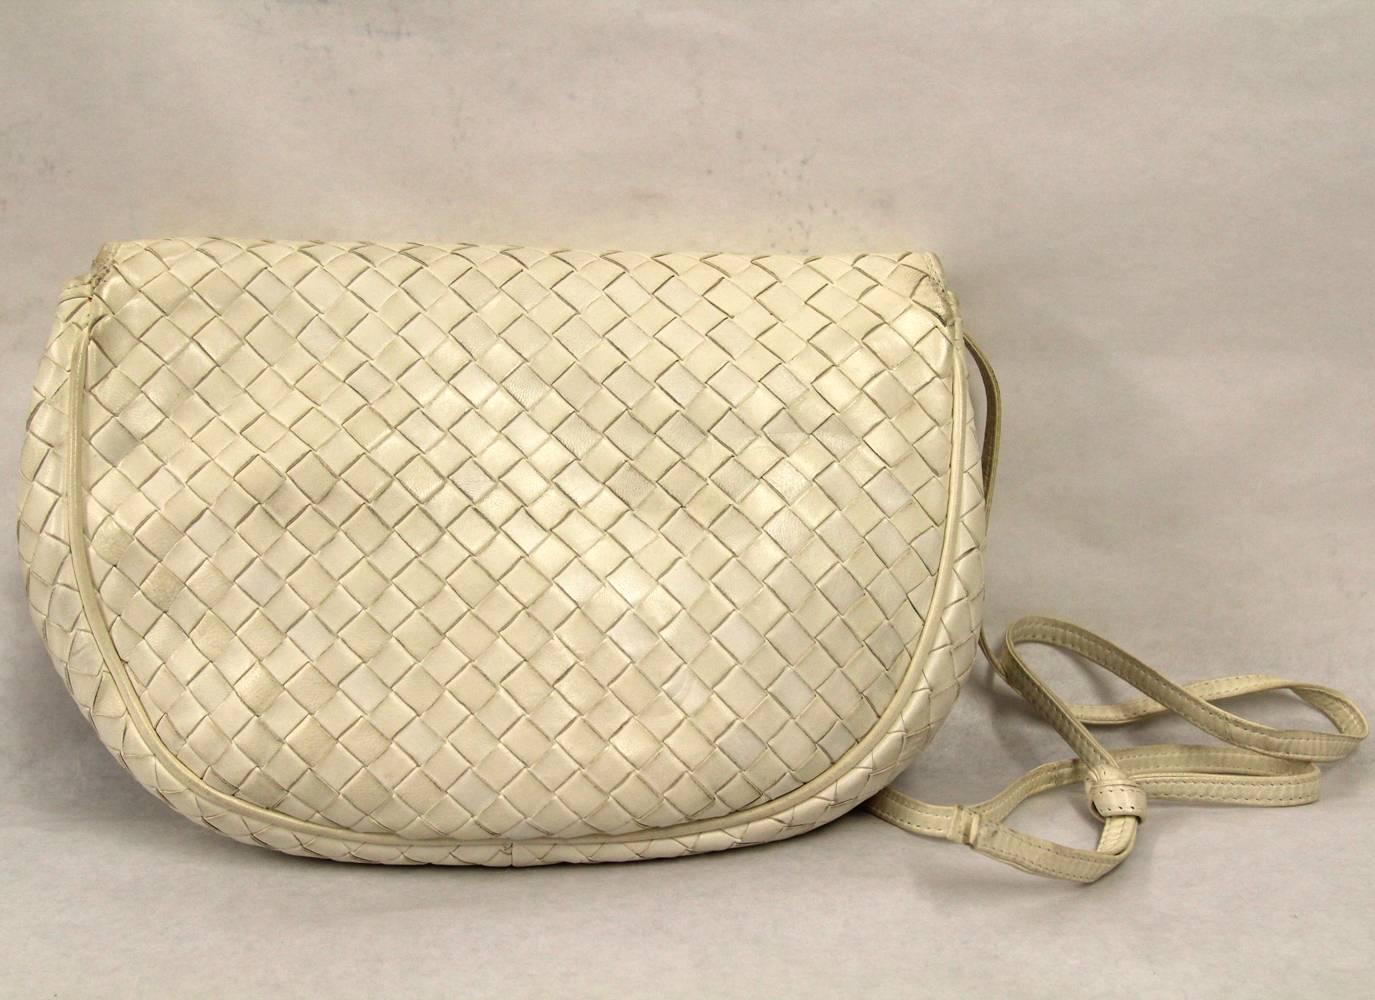 Extremely chic Bottega Veneta crossbody bag from the 1980s. Made of skillfully intertwined white leather, it features two pockets and one zip pocket in the inside. Clasp closure and removable strap. Definitely your ultimate choice for a classy still